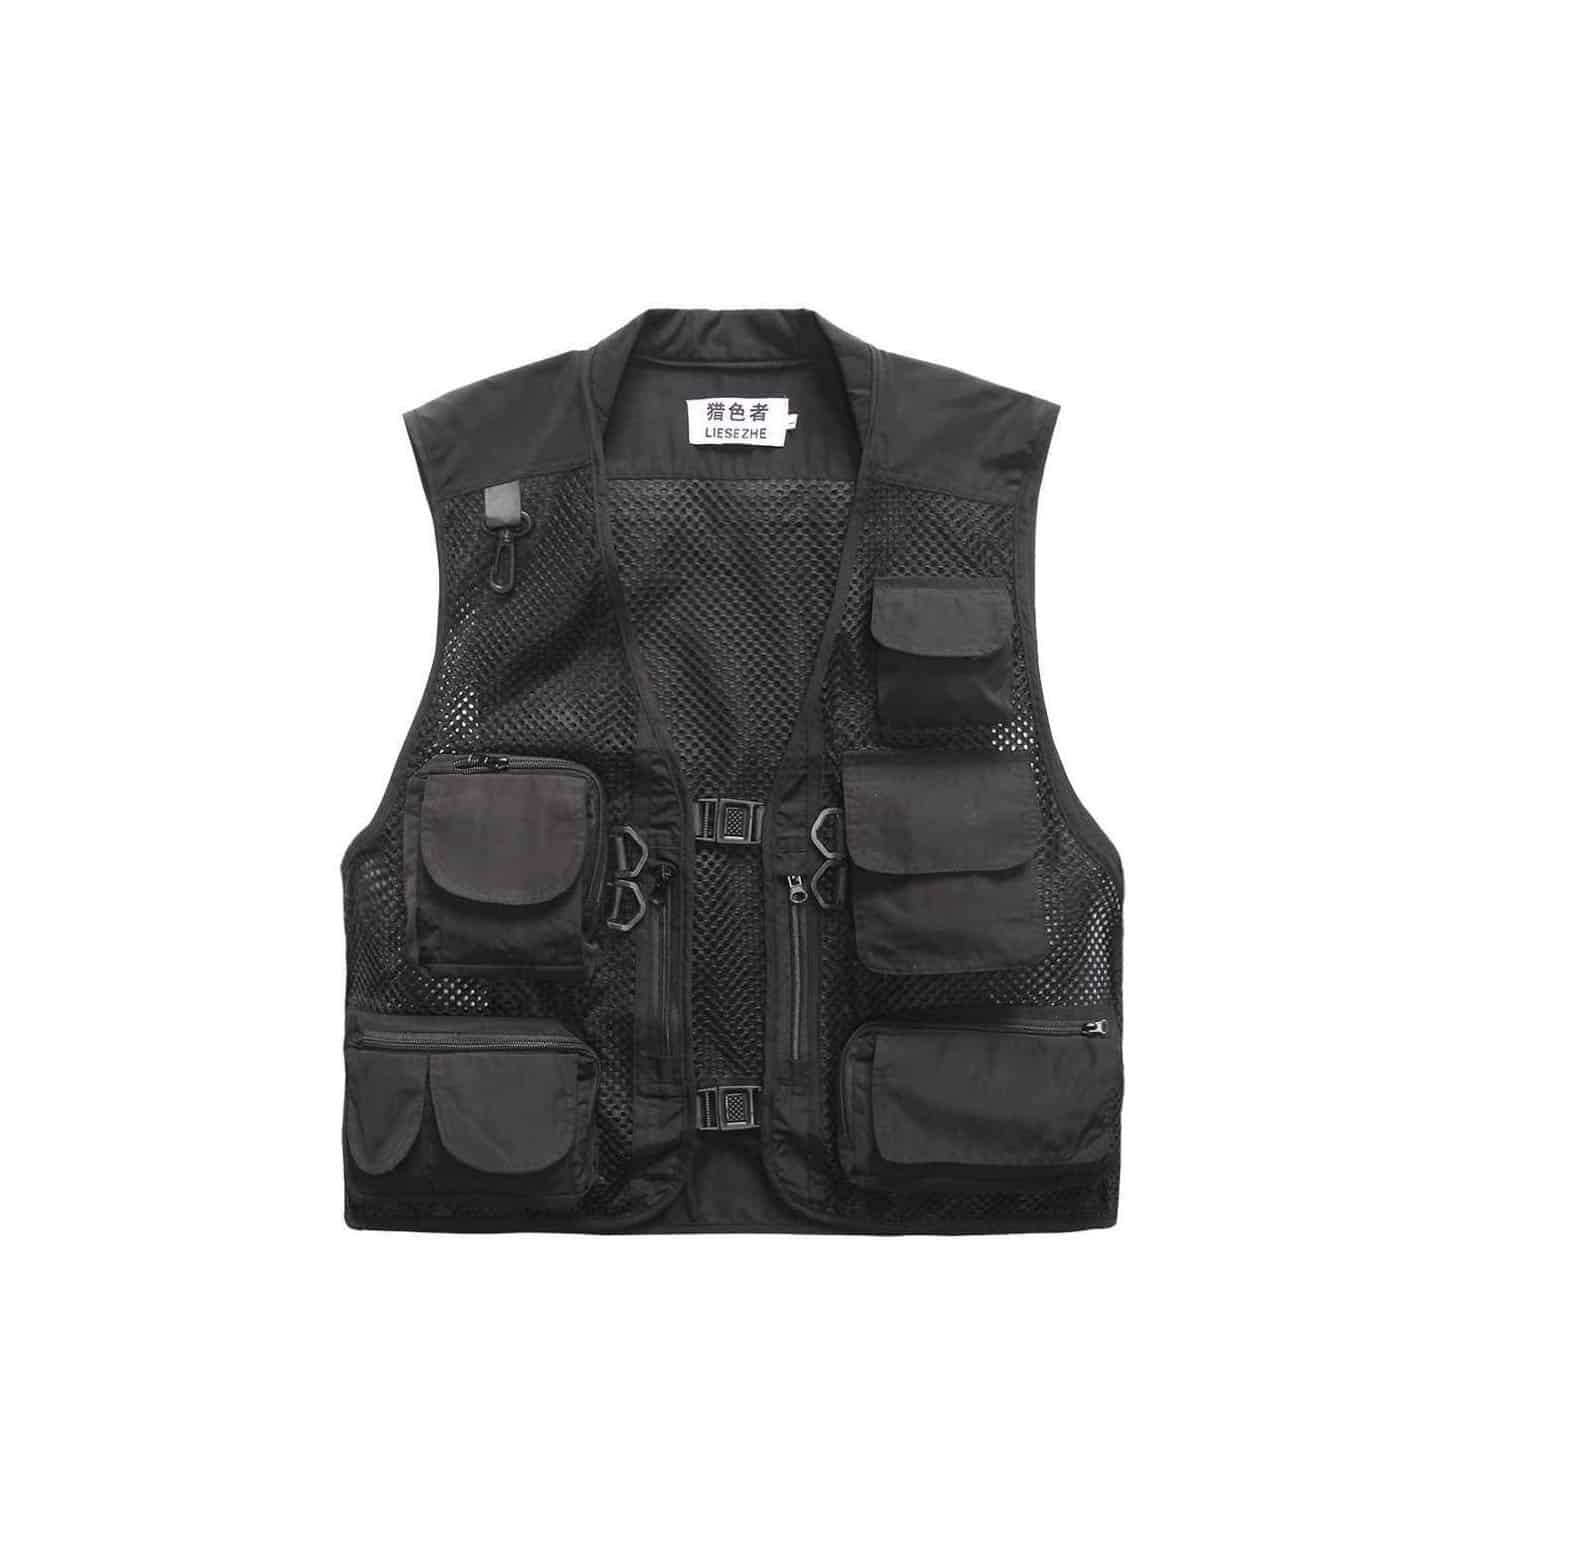 Top 10 Best Fishing Vests in 2021 Reviews | Buying Guide